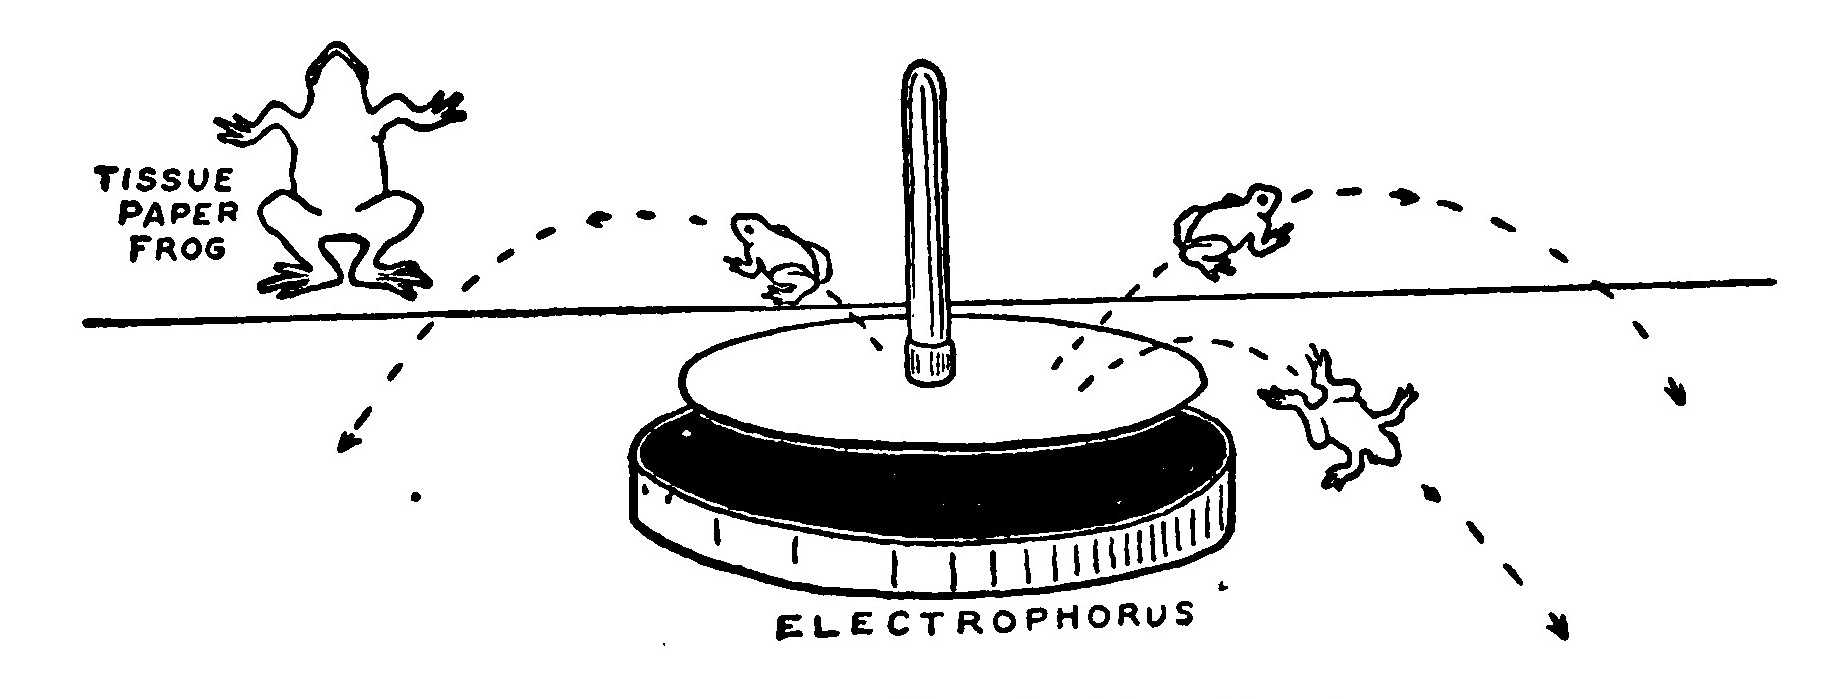 Fig. 28.—An Electric Frog-Pond.